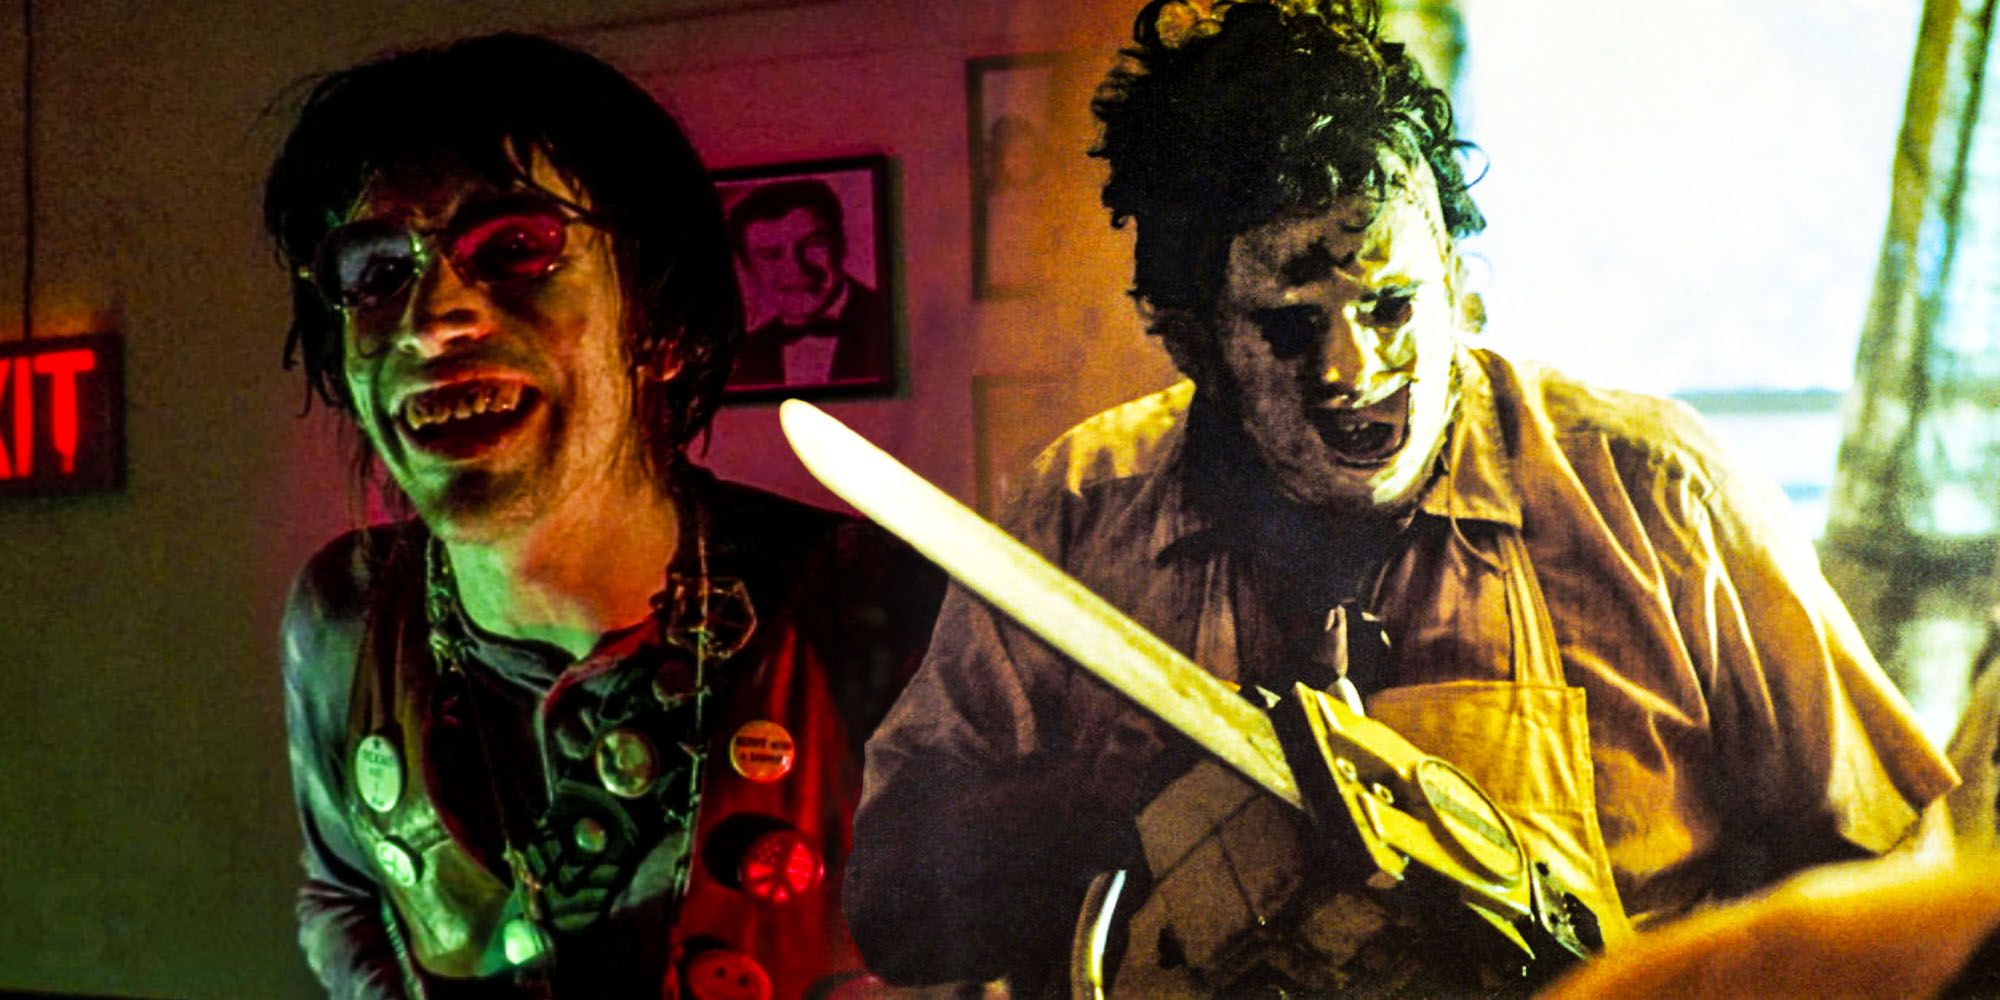 The Unreleased Texas Chainsaw Massacre Spinoff (& Why Never Be Seen)